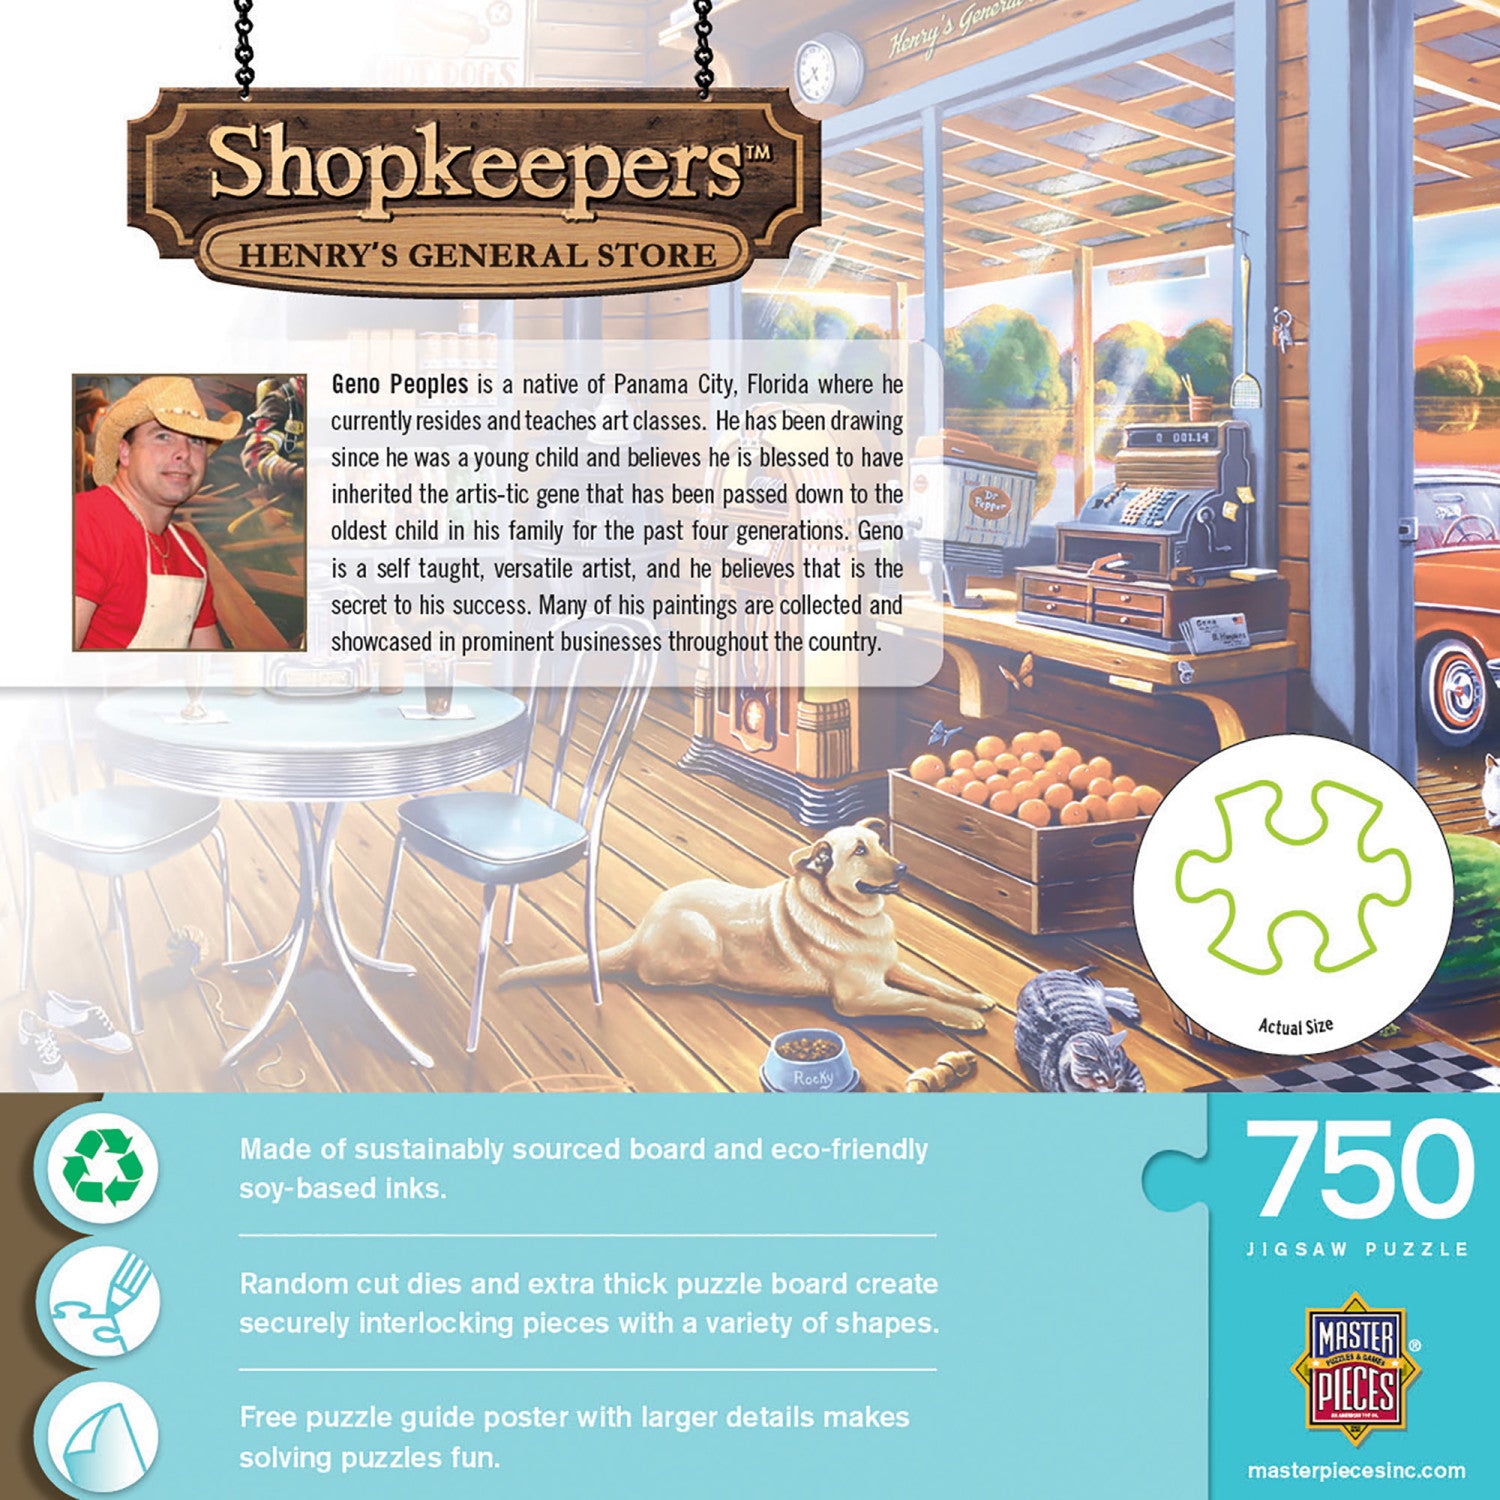 Shopkeepers - Henry's General Store 750 Piece Puzzle